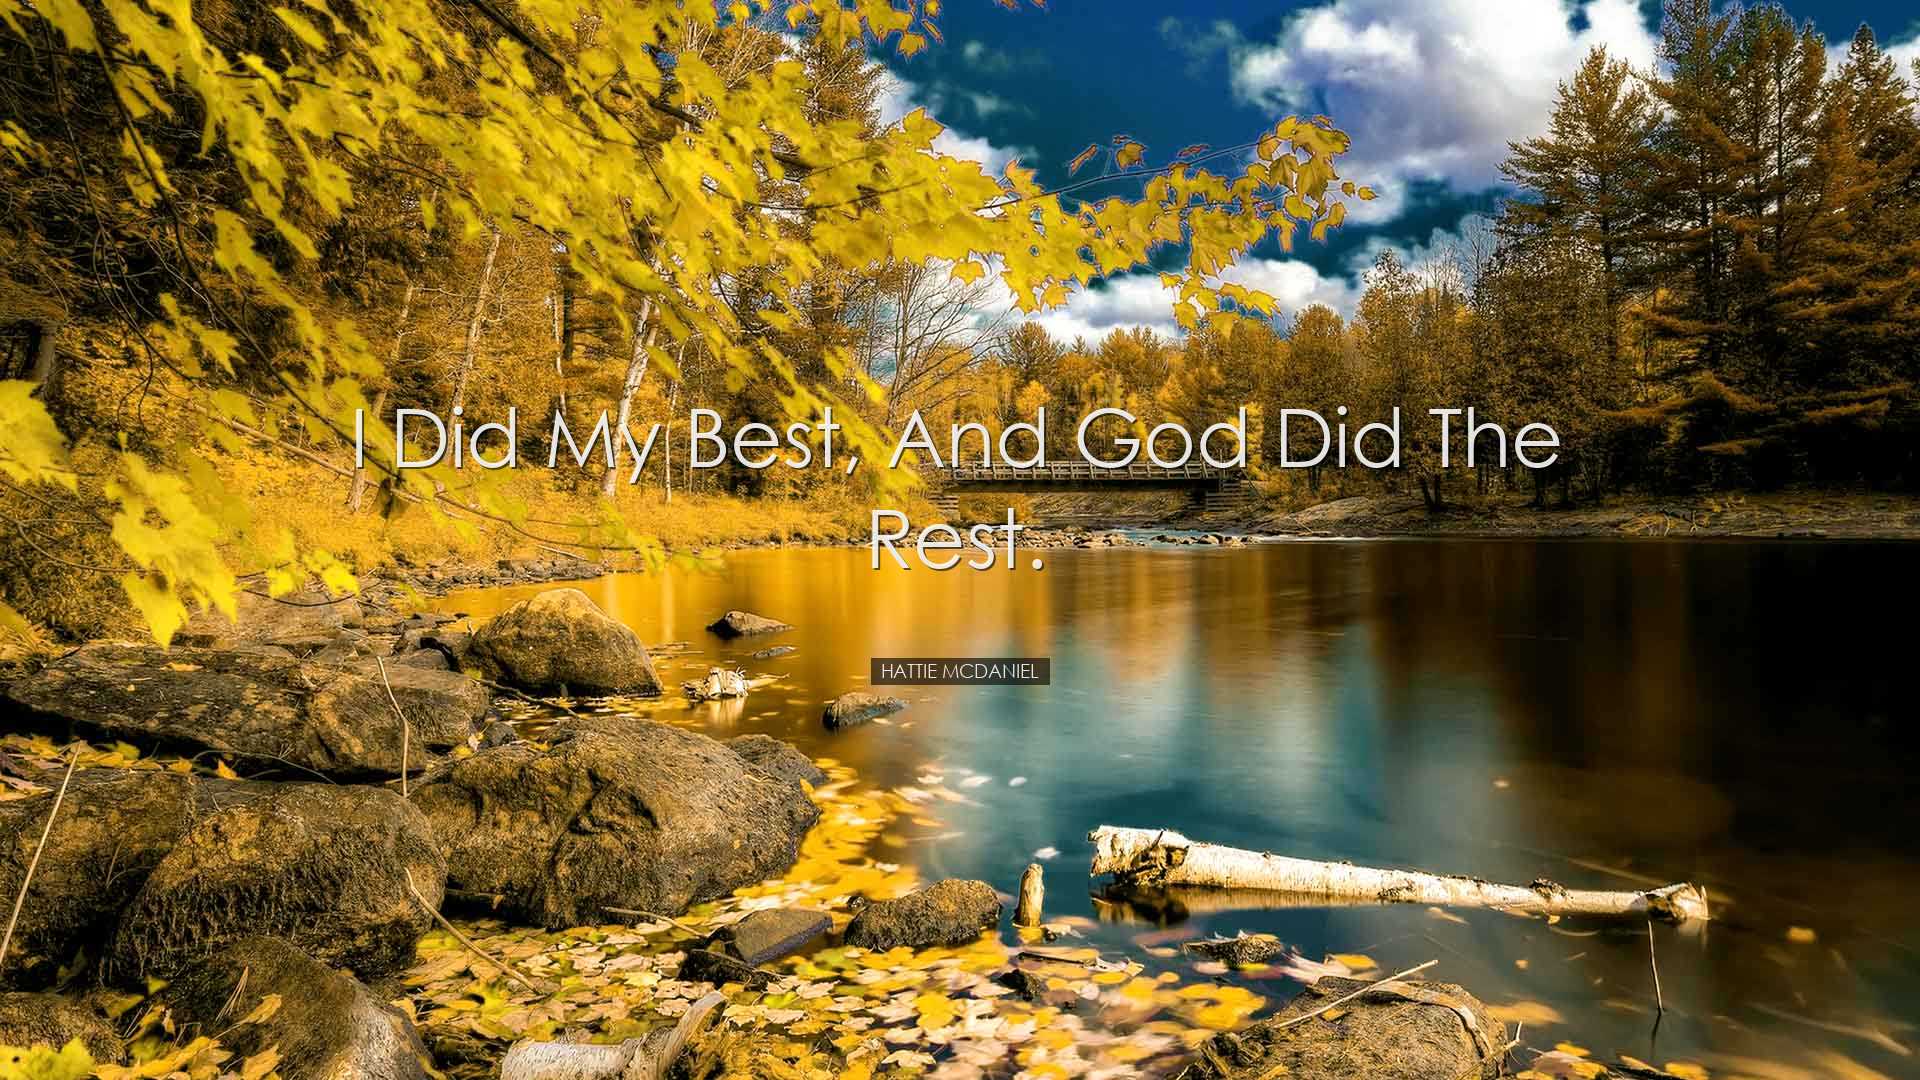 I did my best, and God did the rest. - Hattie McDaniel